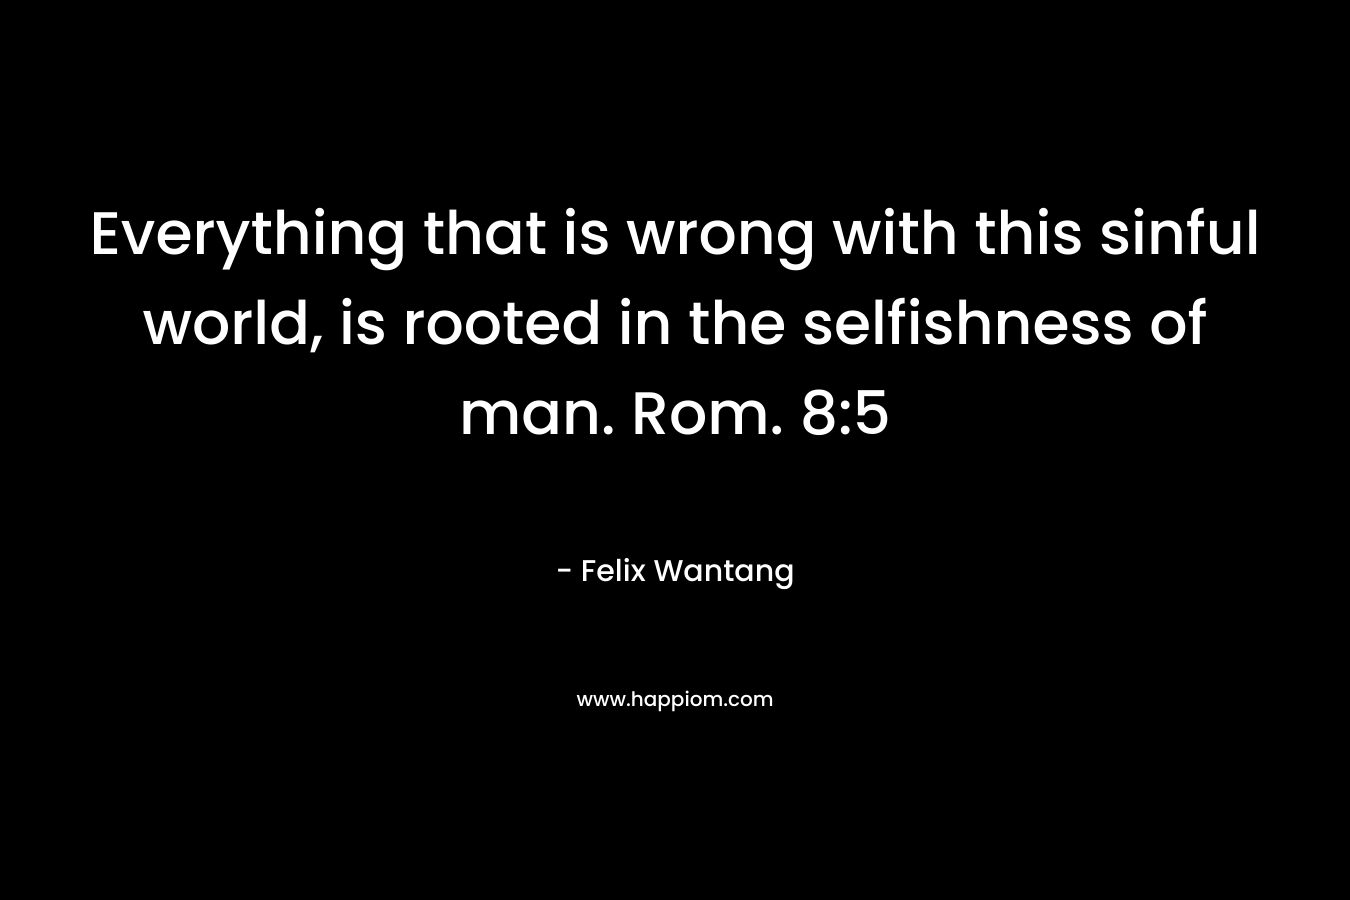 Everything that is wrong with this sinful world, is rooted in the selfishness of man. Rom. 8:5 – Felix Wantang